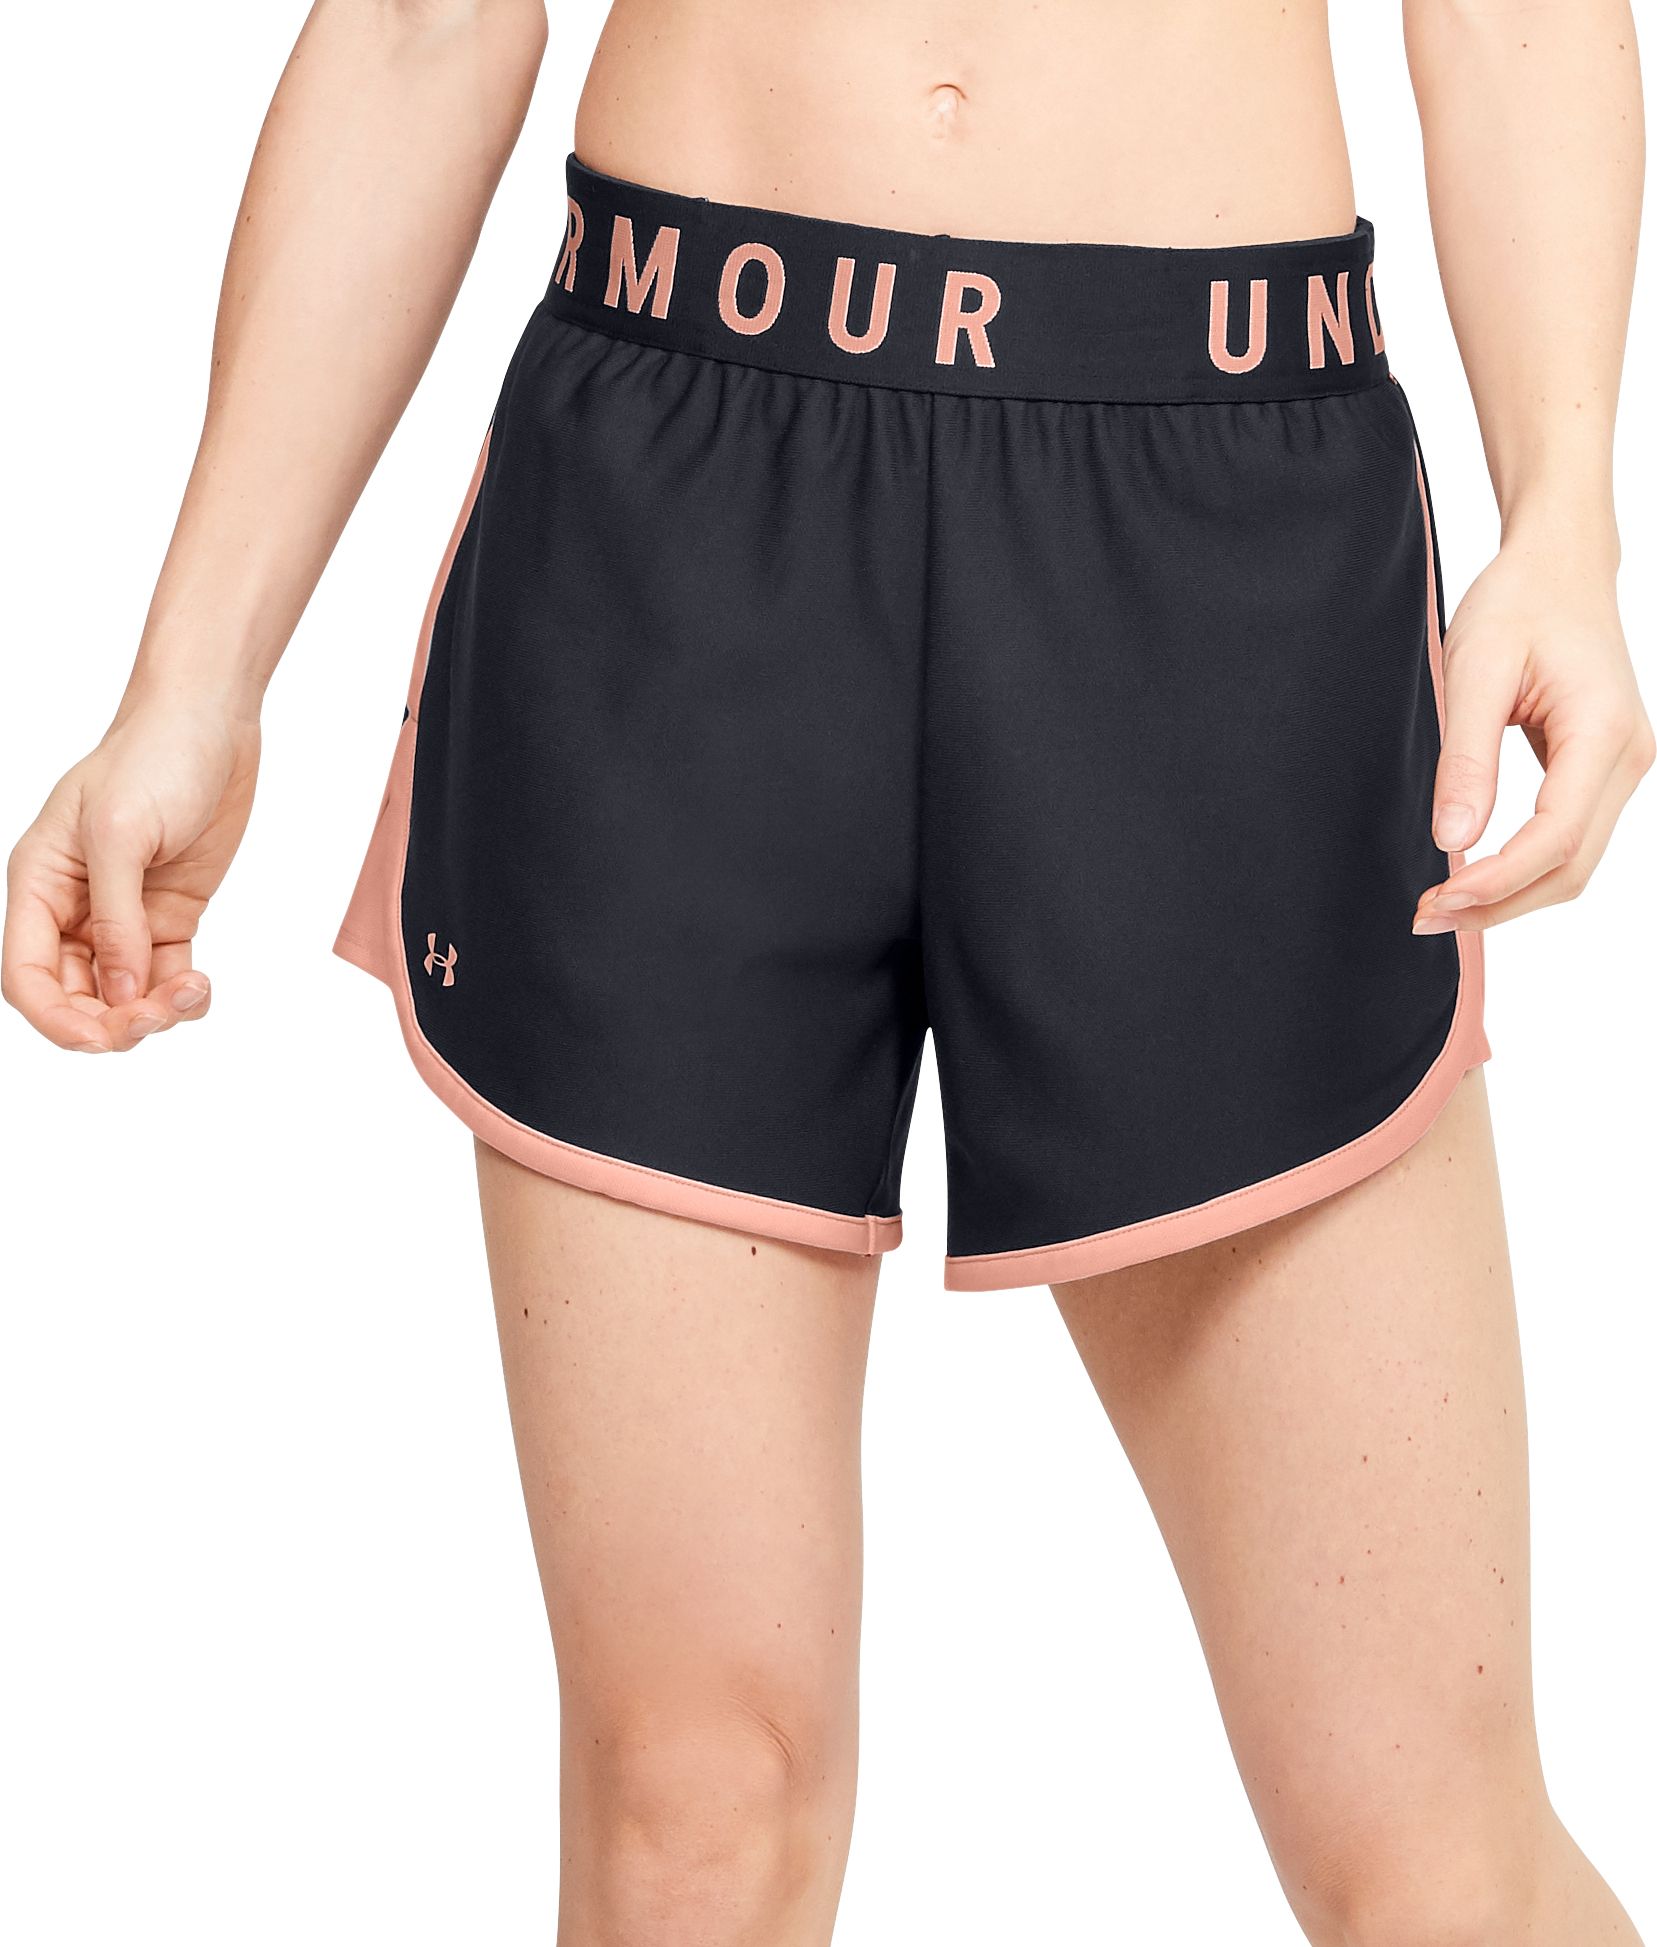 under armor play up shorts